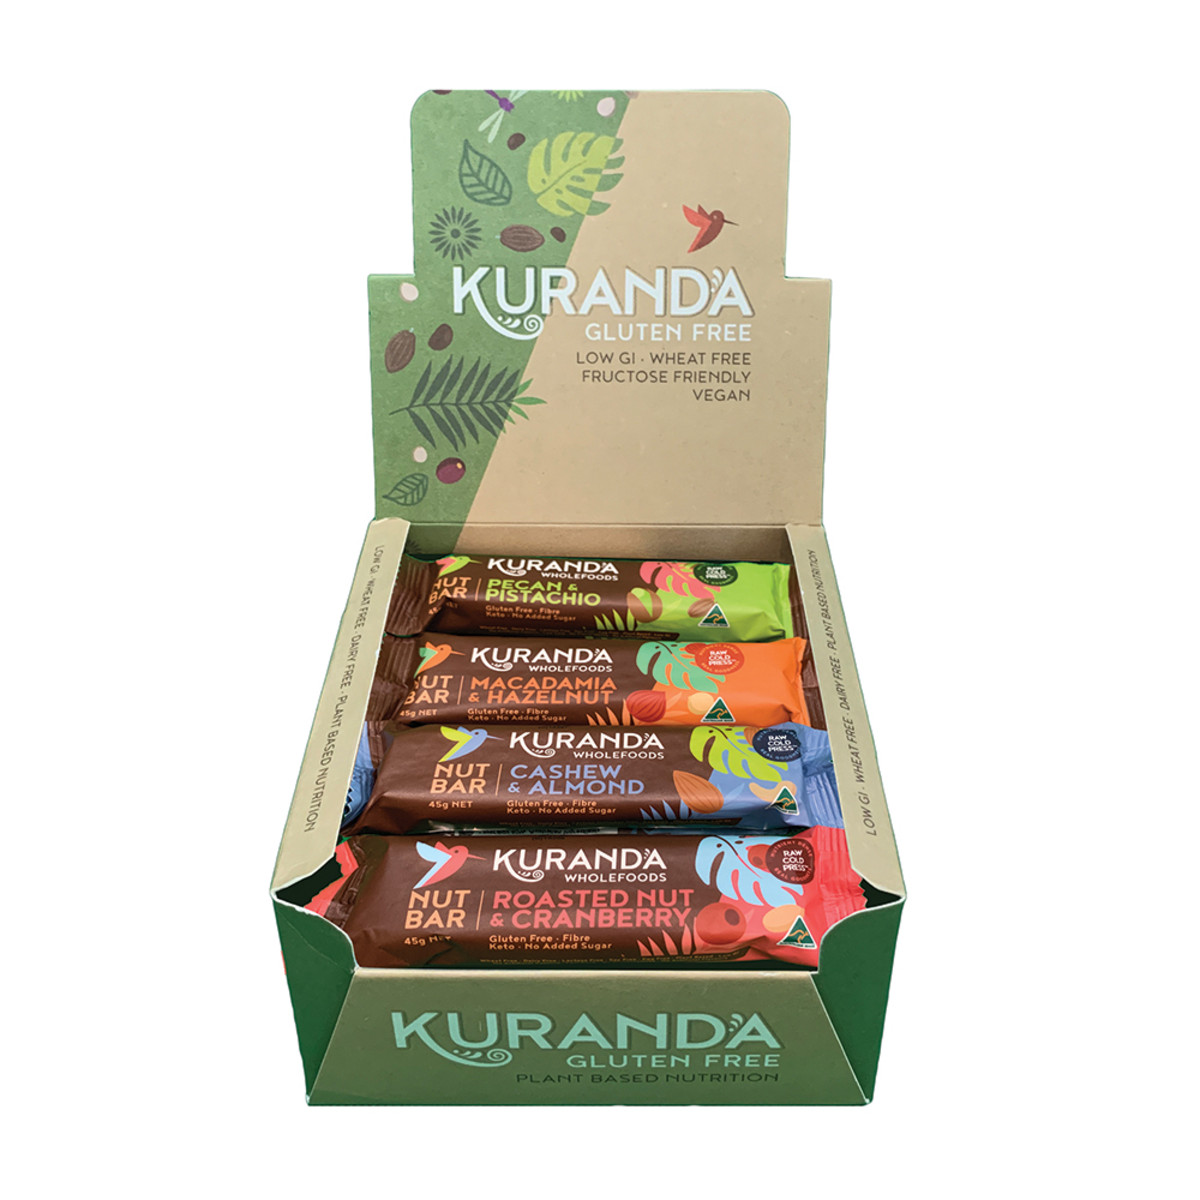 Kuranda Wholefoods Gluten Free Nut Bars Mixed 45g x 16 Display (contains: 4 of each flavour)